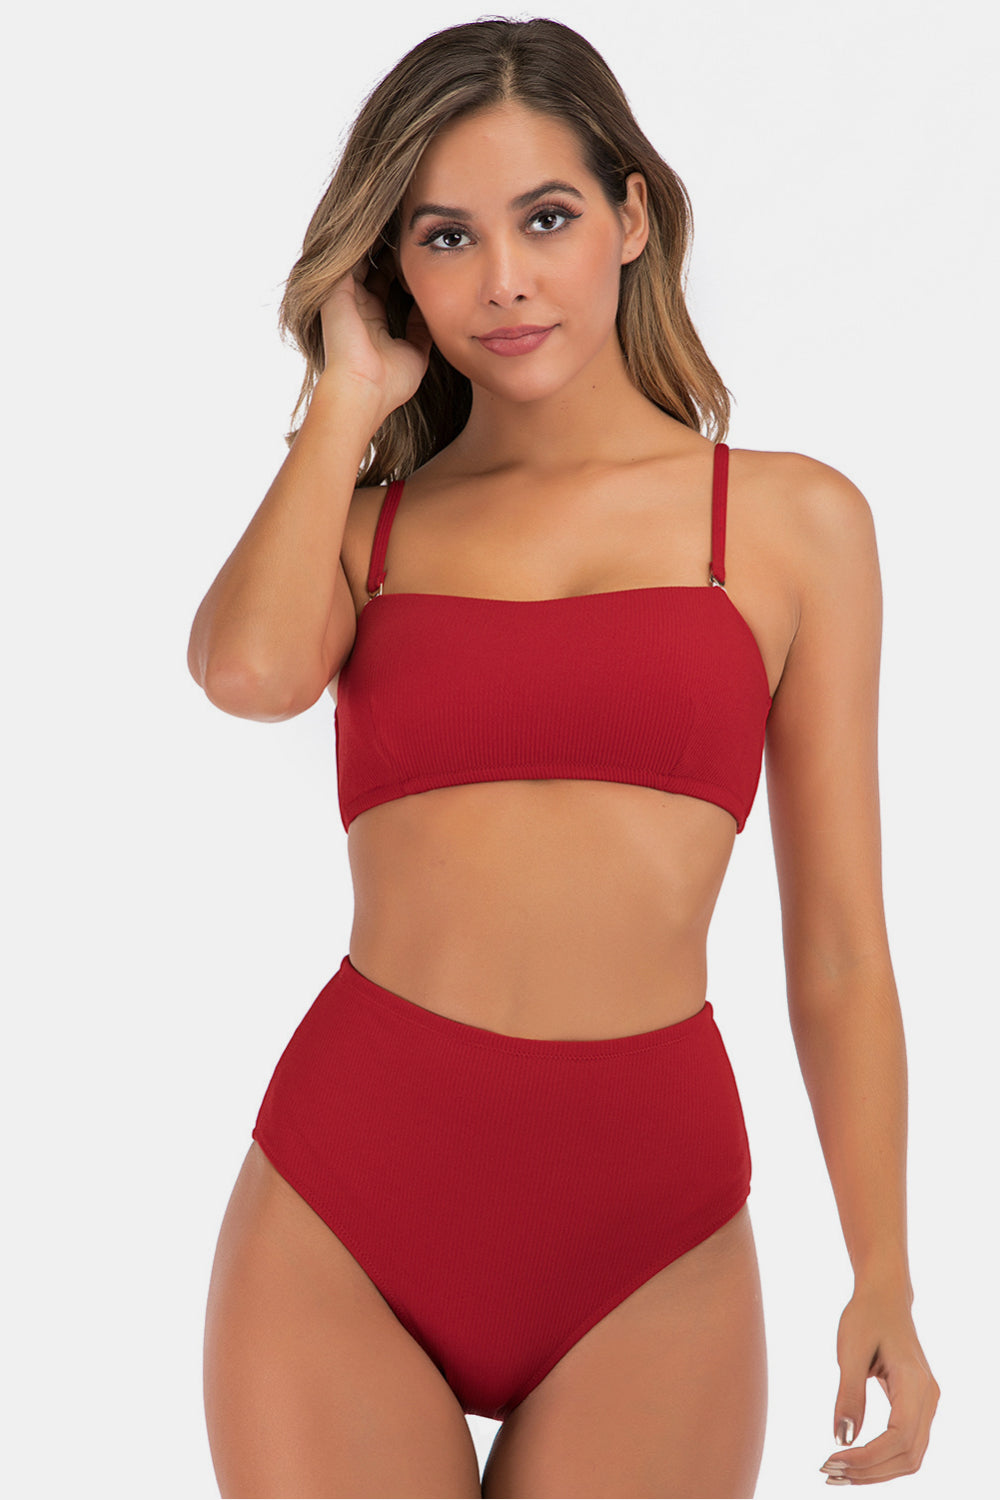 Ribbed Removable Spaghetti Strap Two-Piece Swimsuit - PINKCOLADA